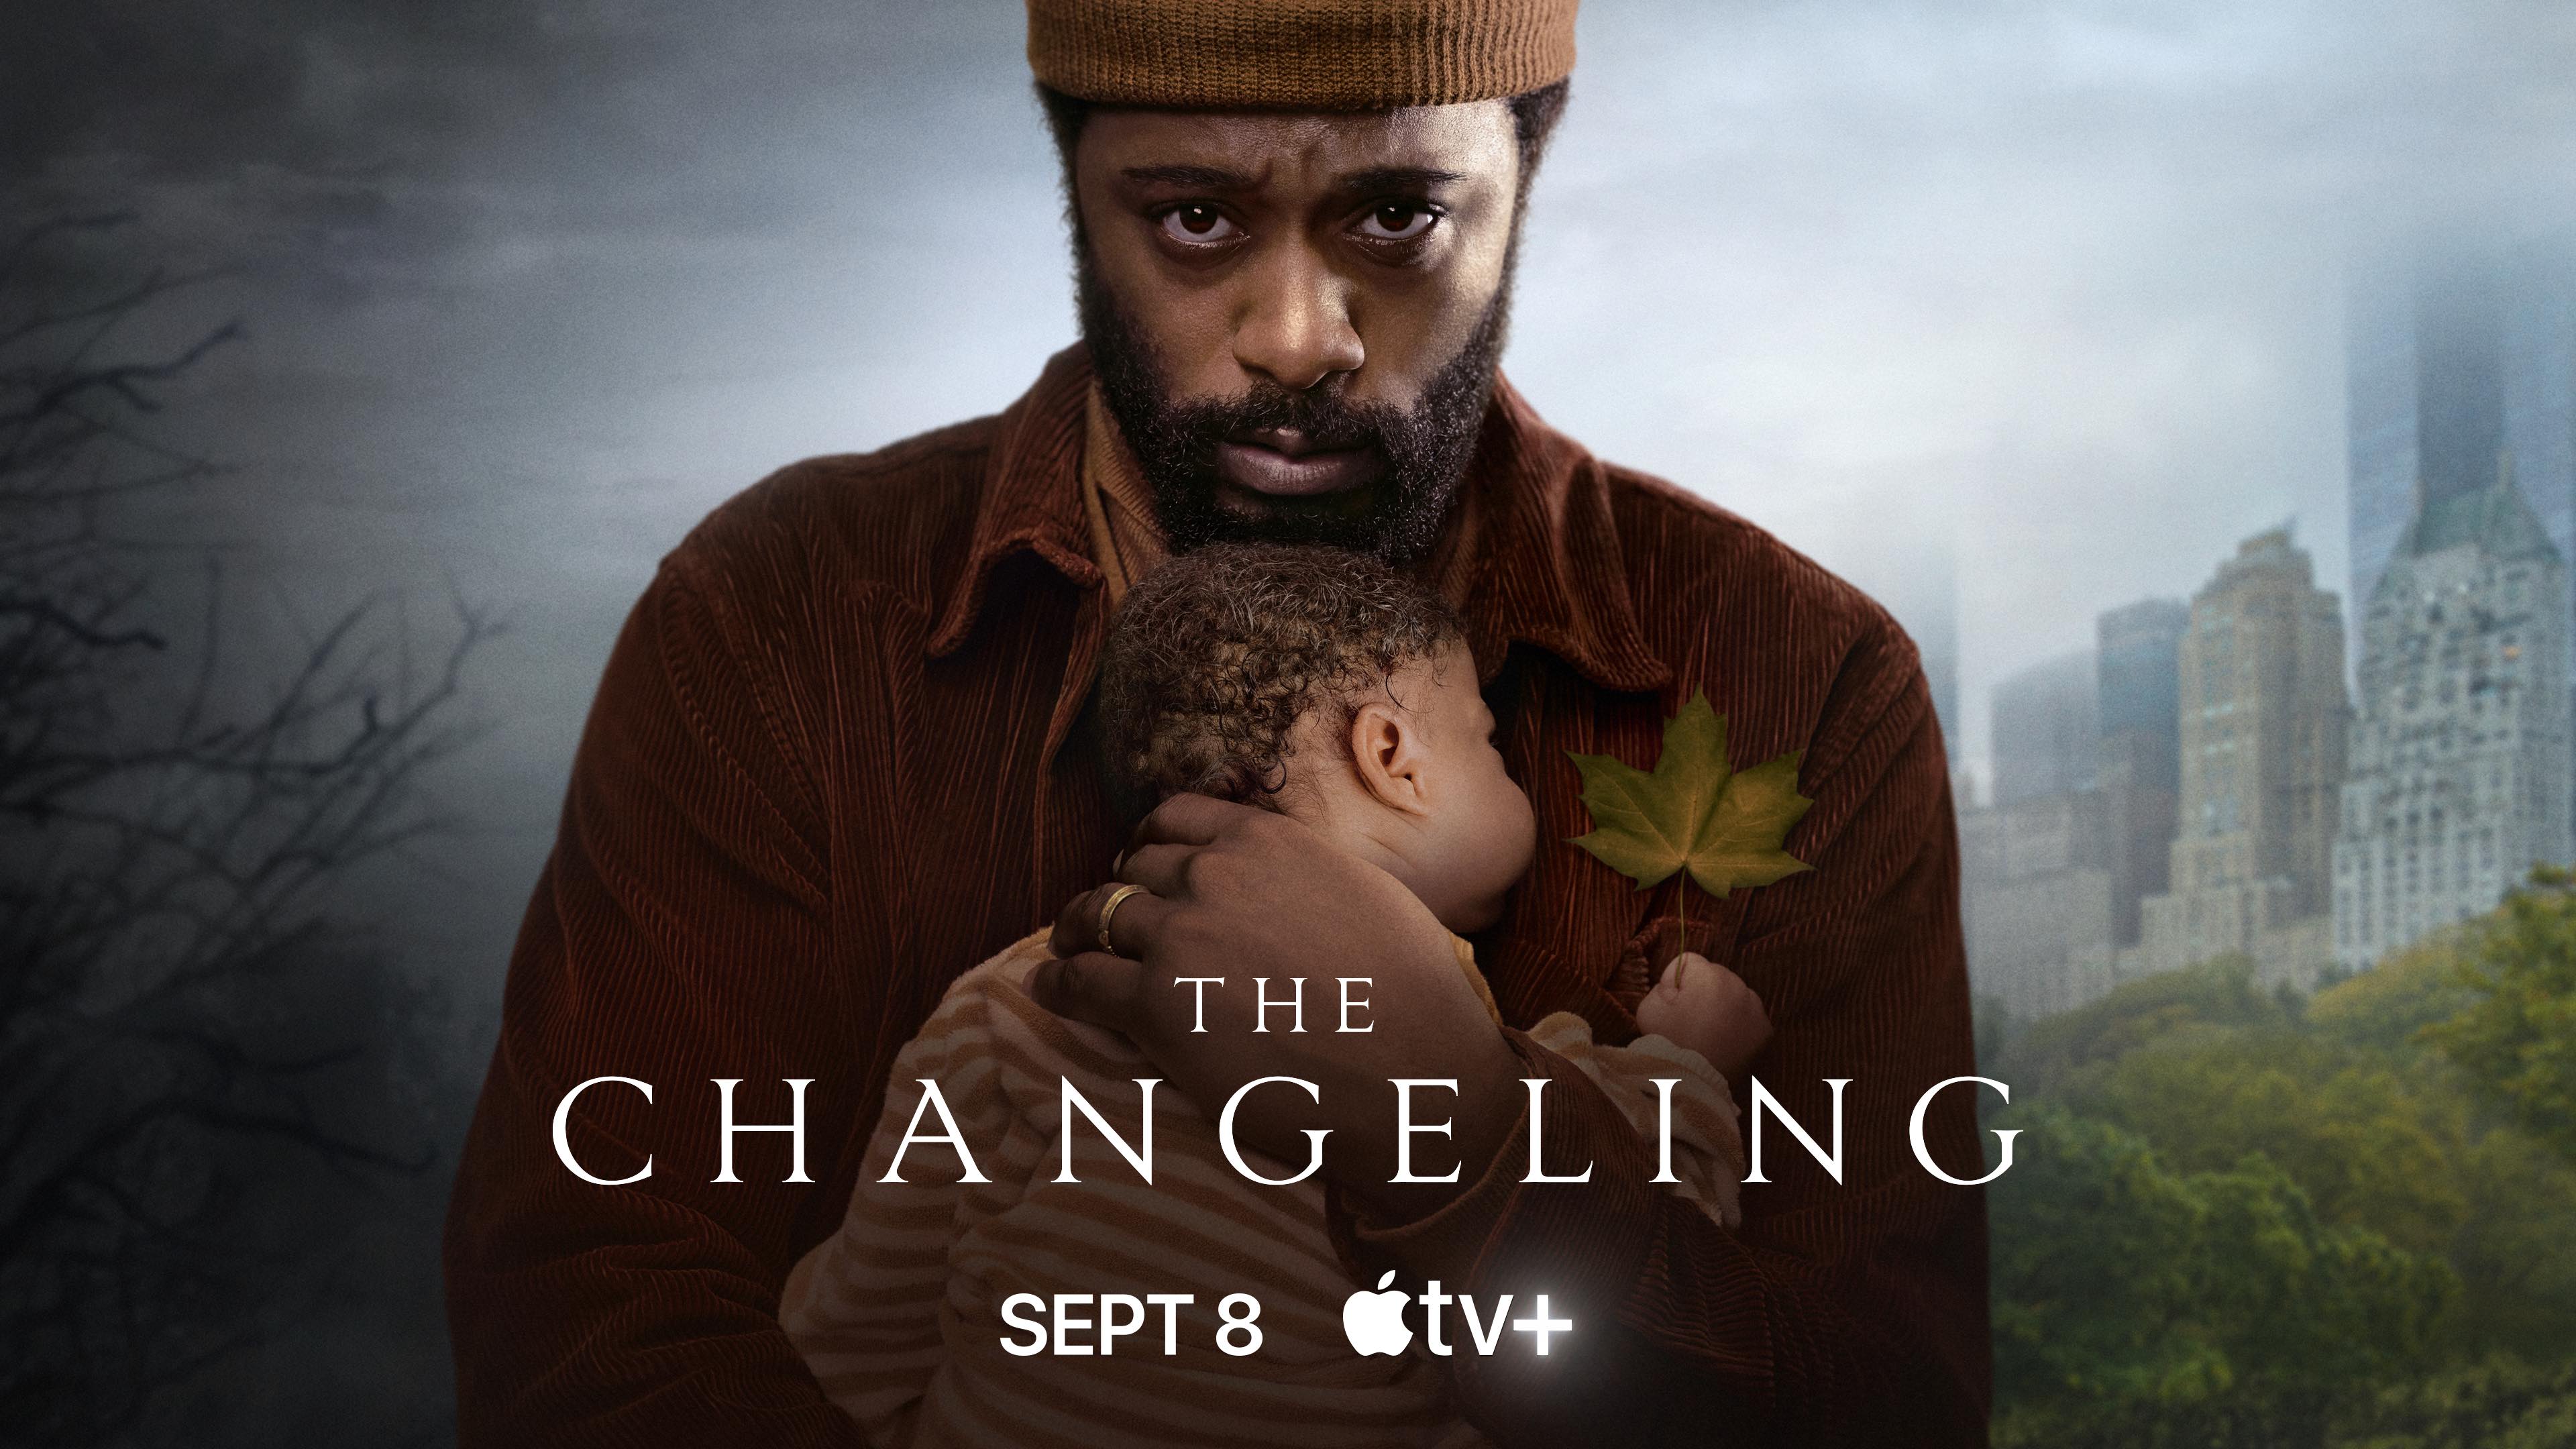 The Changeling Cast - Every Actor and Character in the Apple TV+ Series